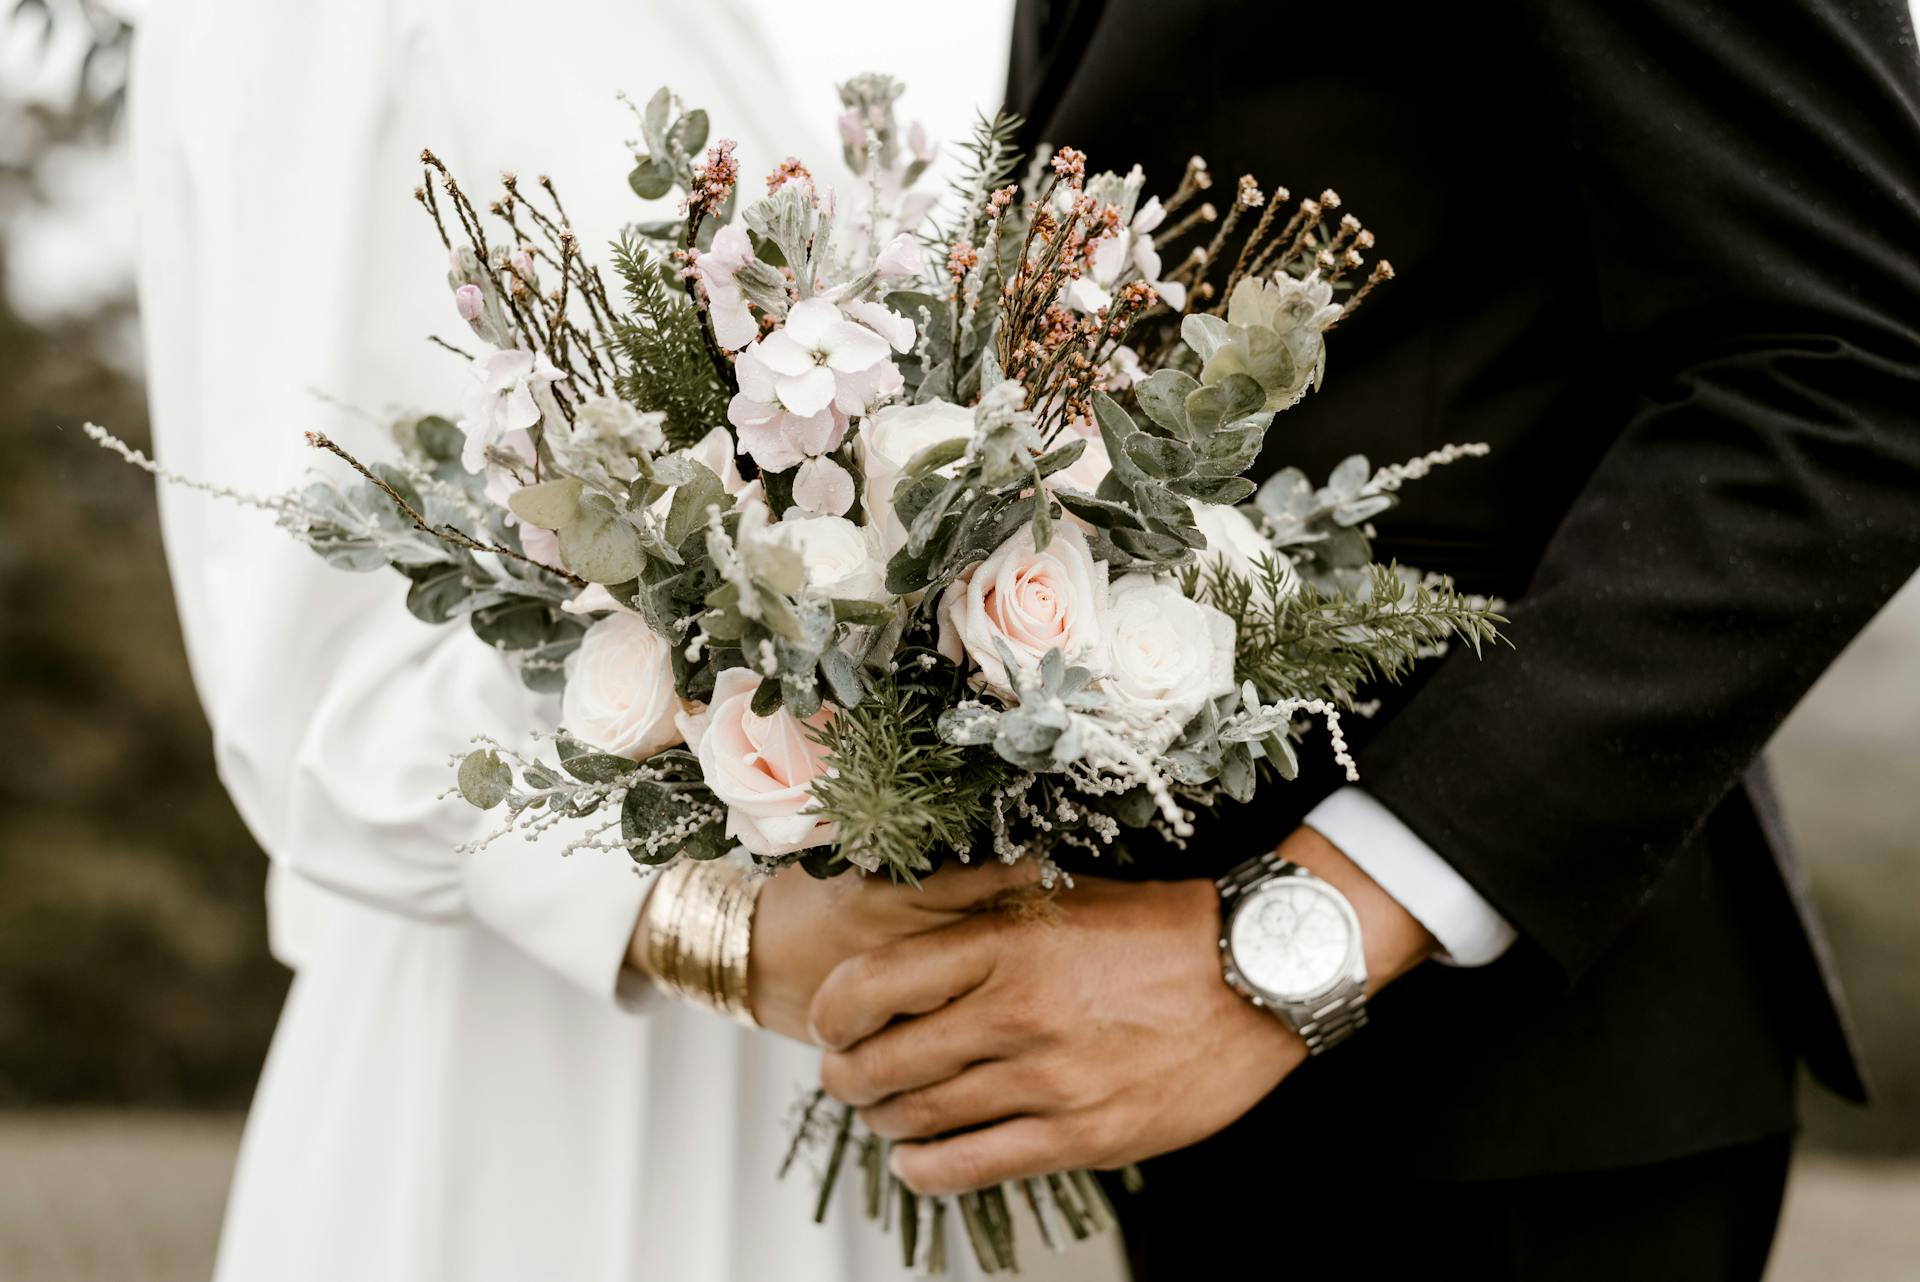 A bride and groom holding hands | Source: Pexels